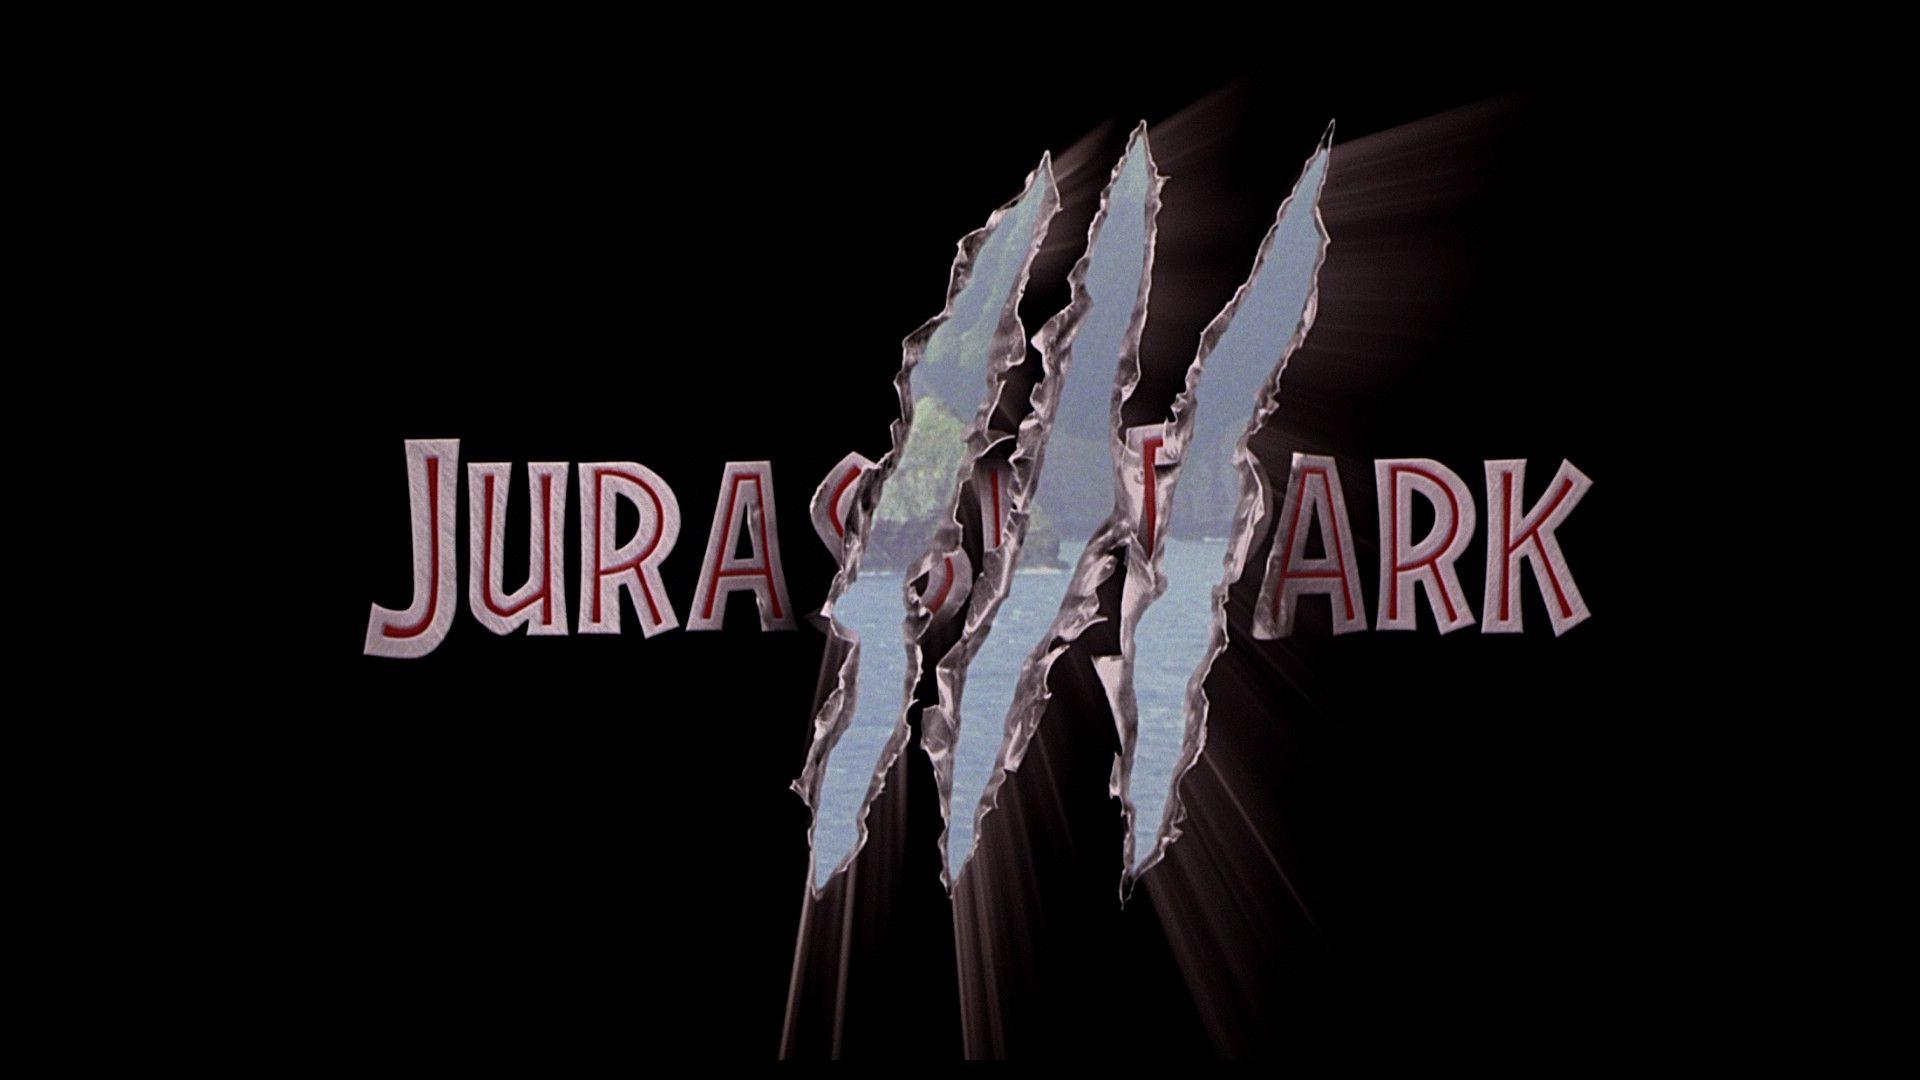 Jurassic Park III (2001) Movie in HD and Wallpaper